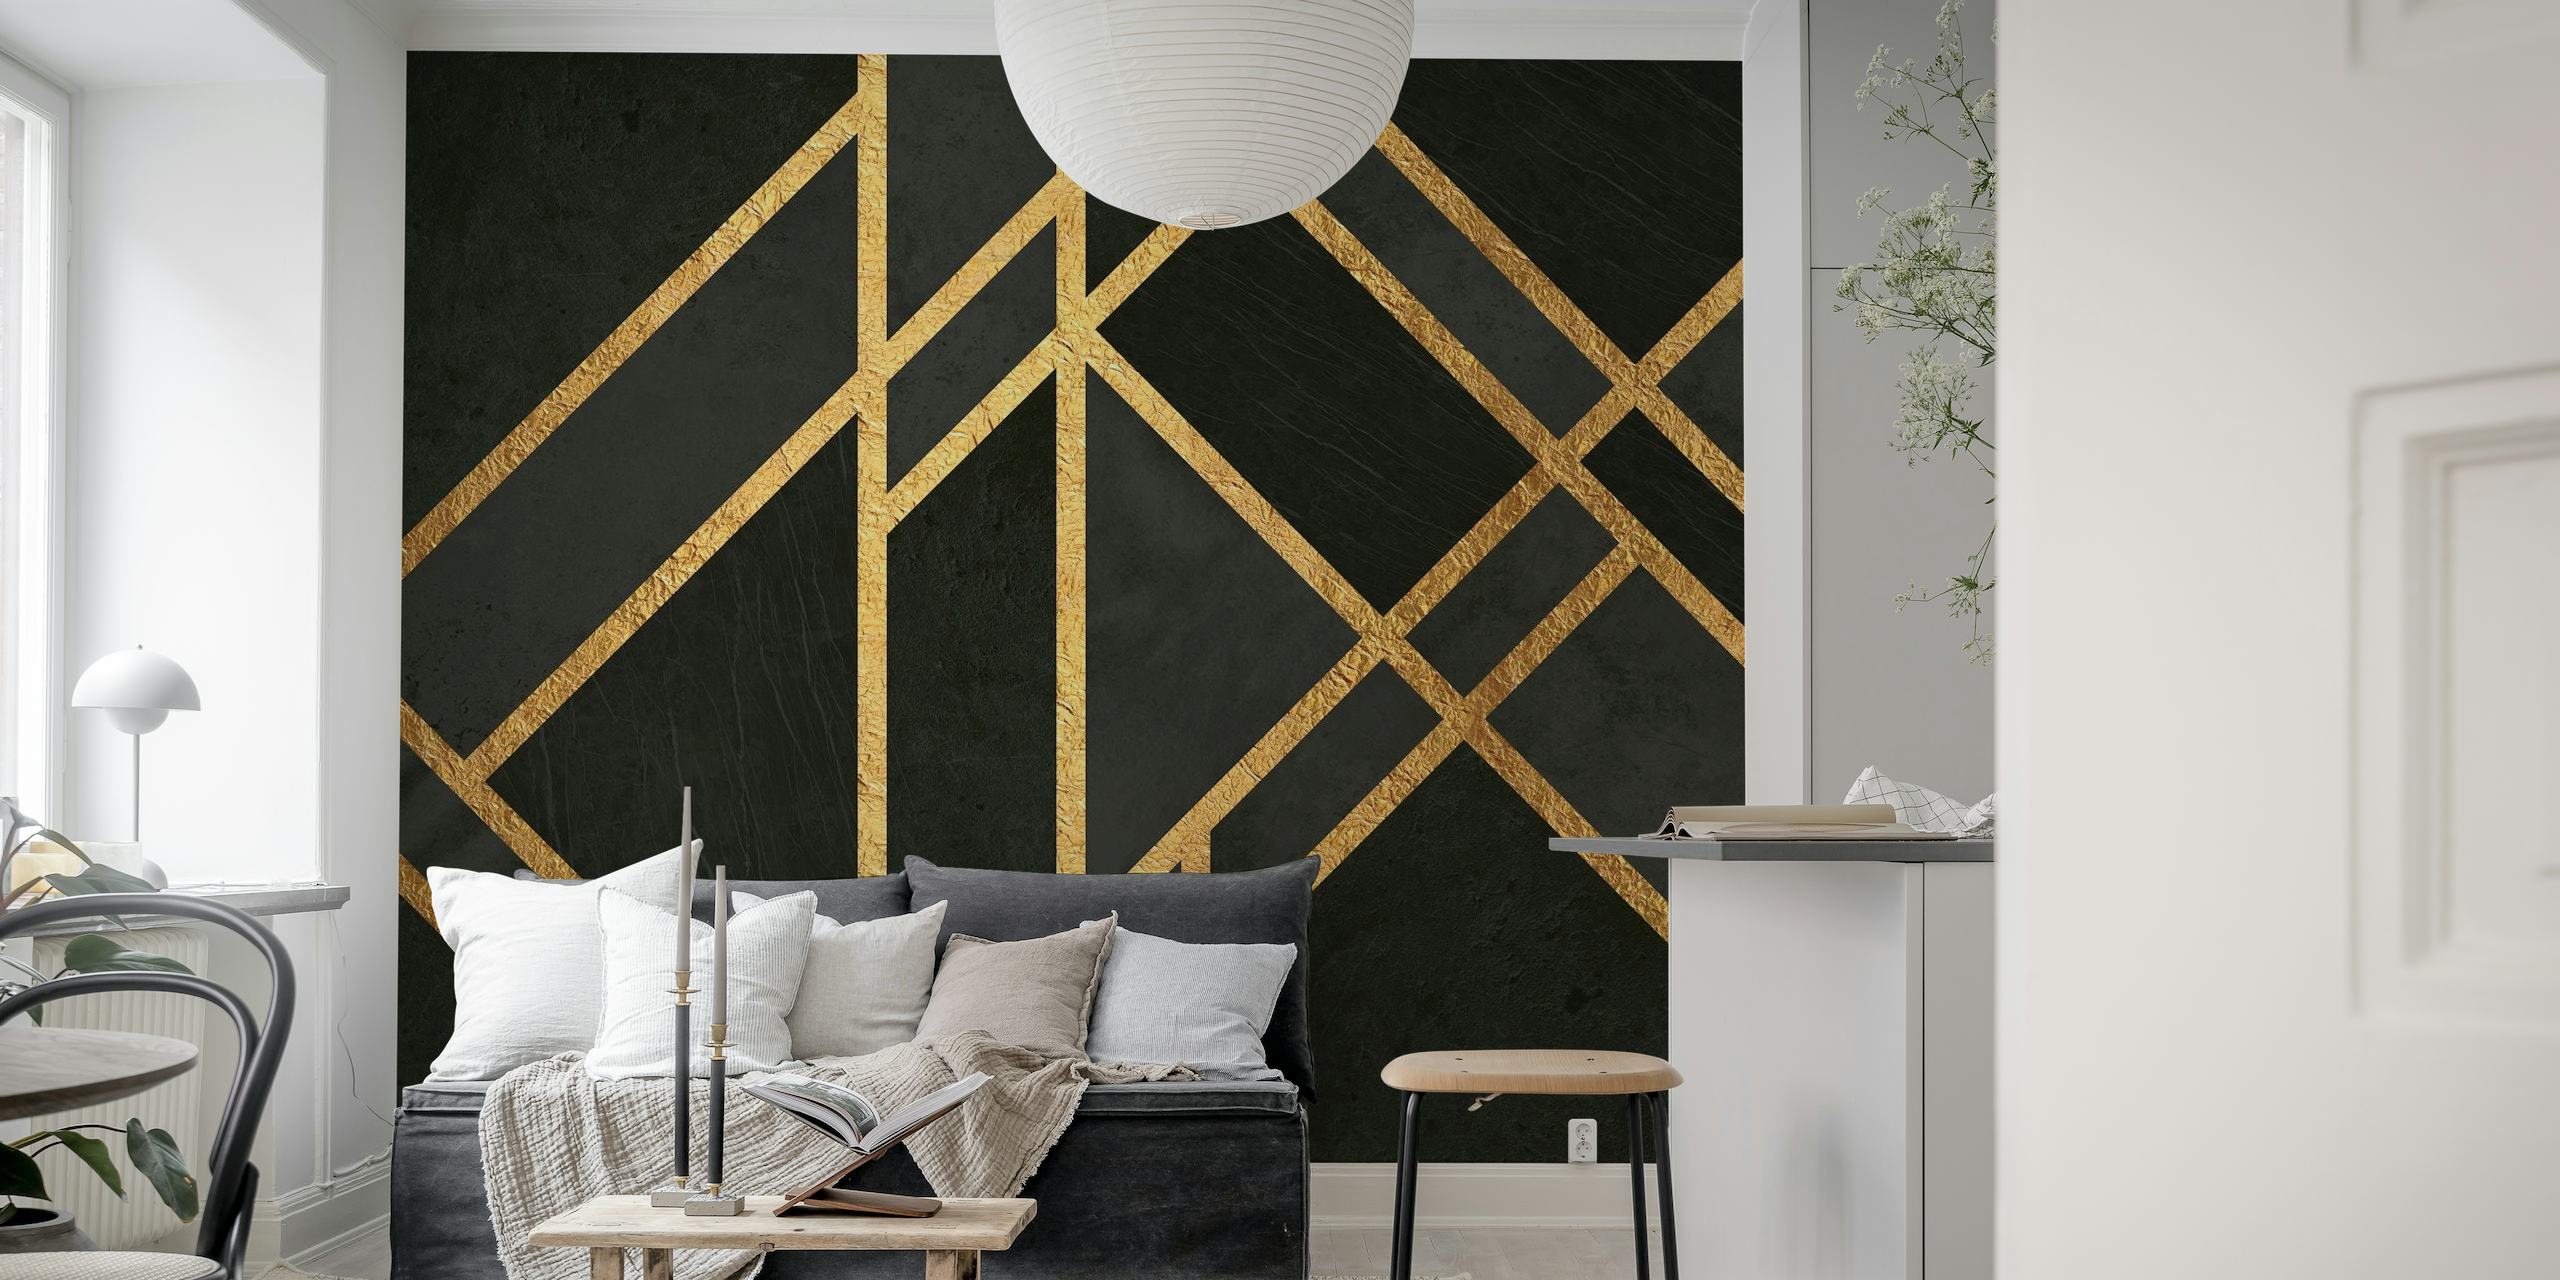 Urban Black Art Deco wall mural with gold geometric patterns on a black background